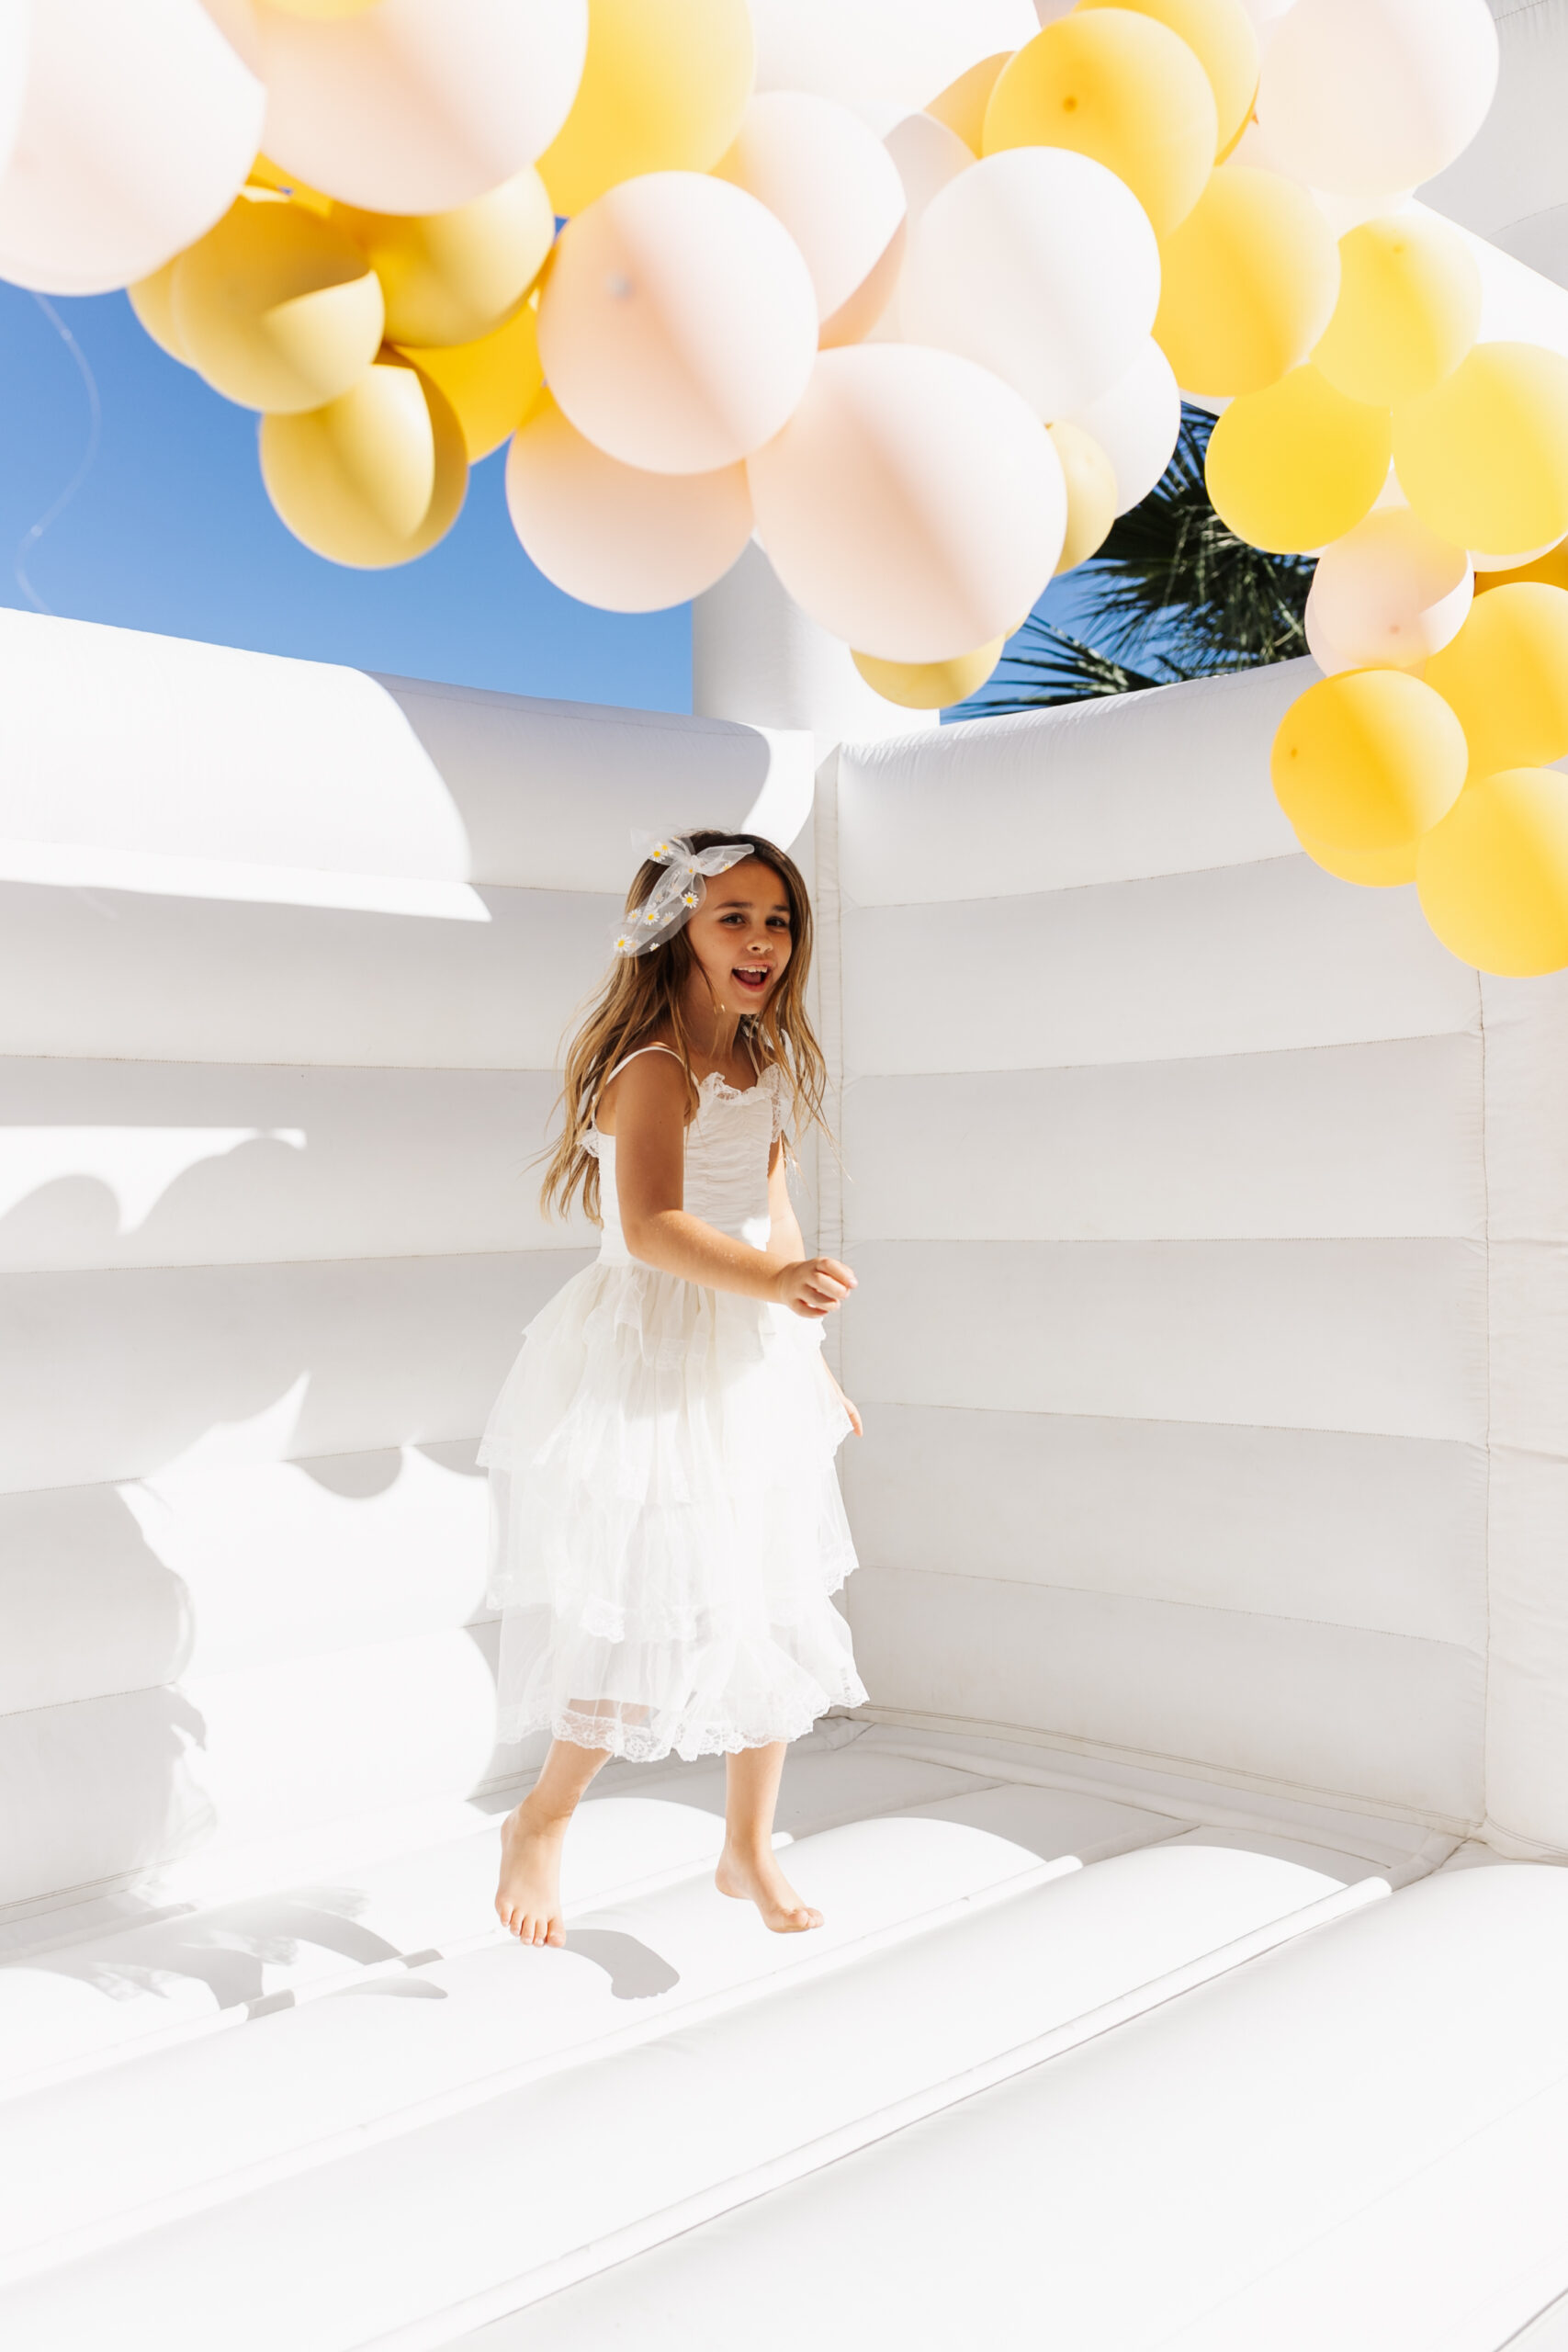 the best white bounce house for kids! #inflate48 #localaz #kidspartyideas